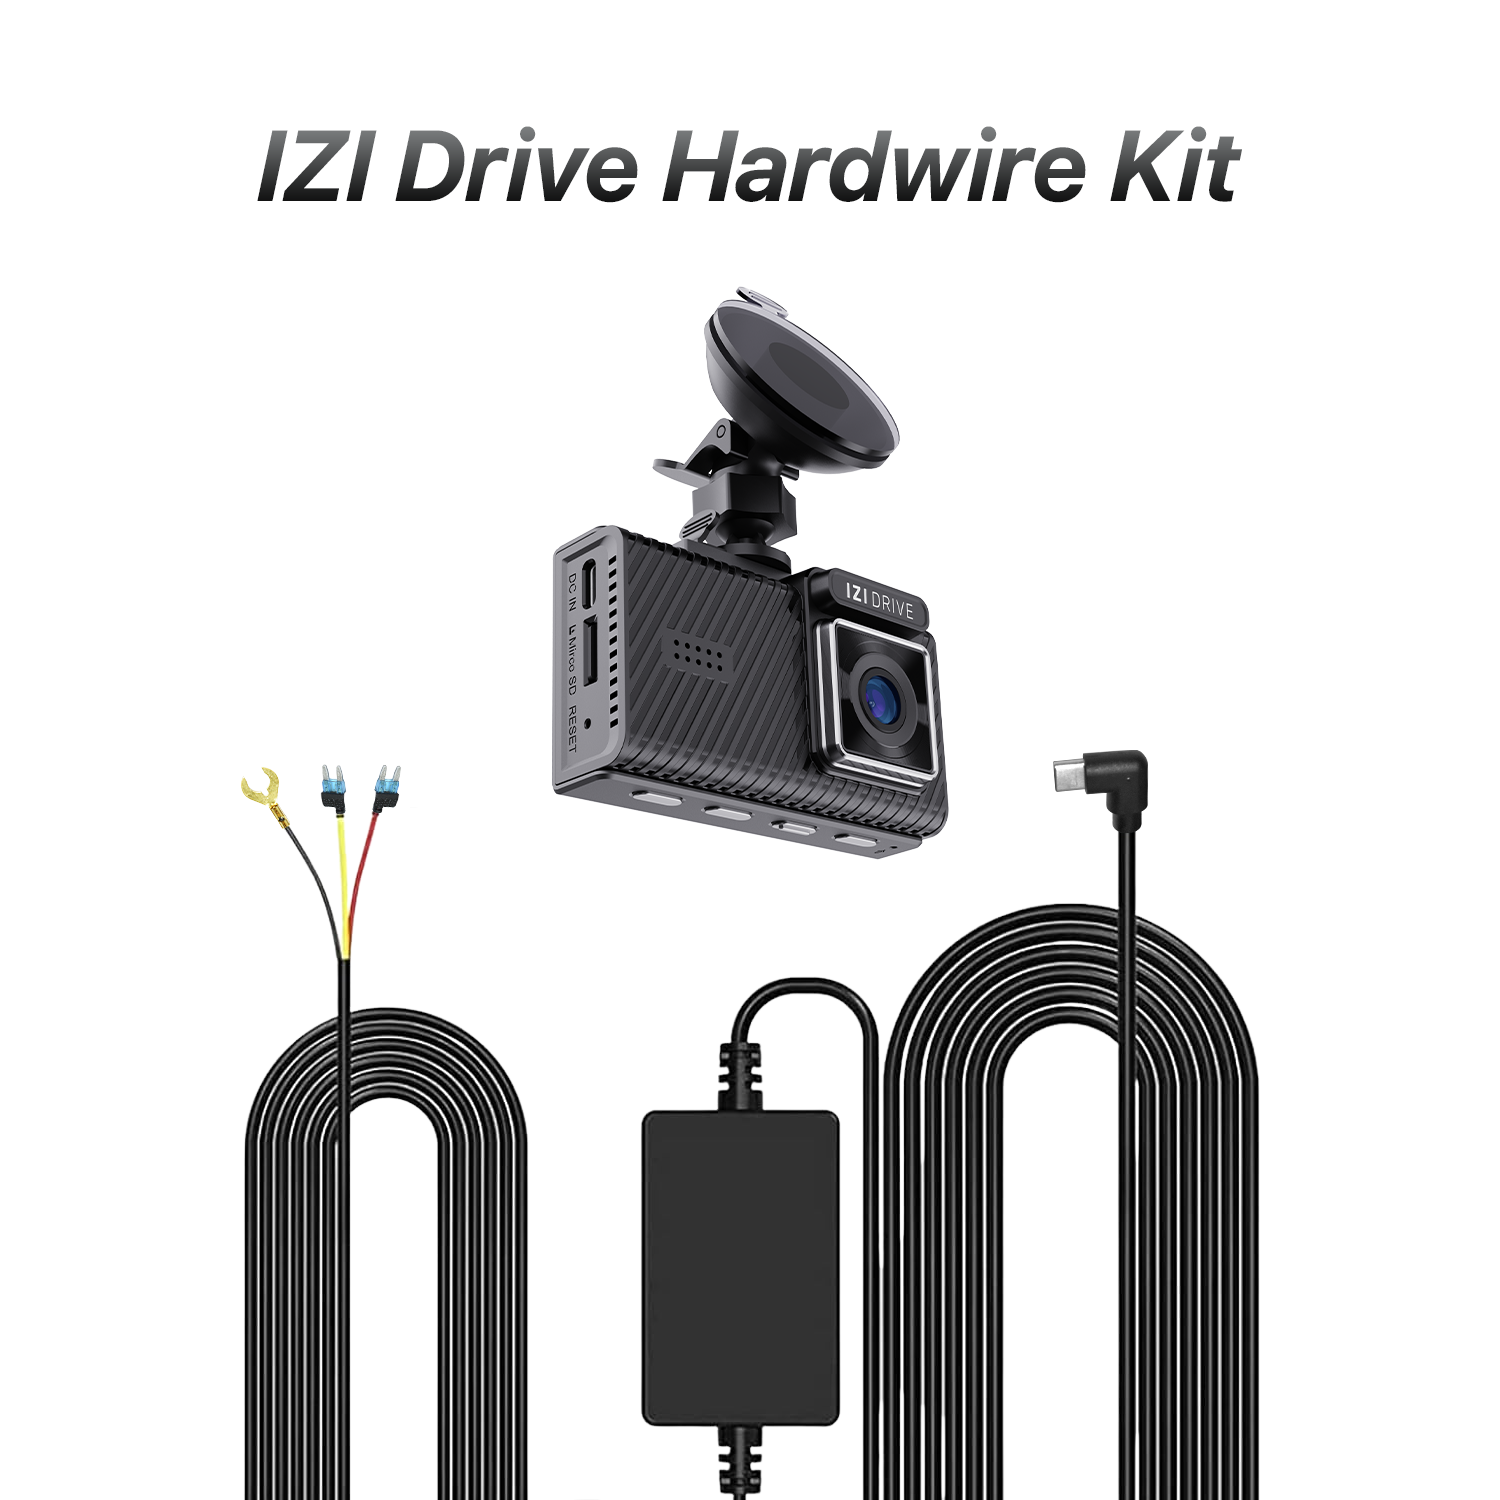 IZI DRIVE 4K Dash Camera with GPS, 3inch FHD Screen + IZI Drive Dash Cam USB Hardwire Cable Kit for 24 Hour Parking Monitoring Combo